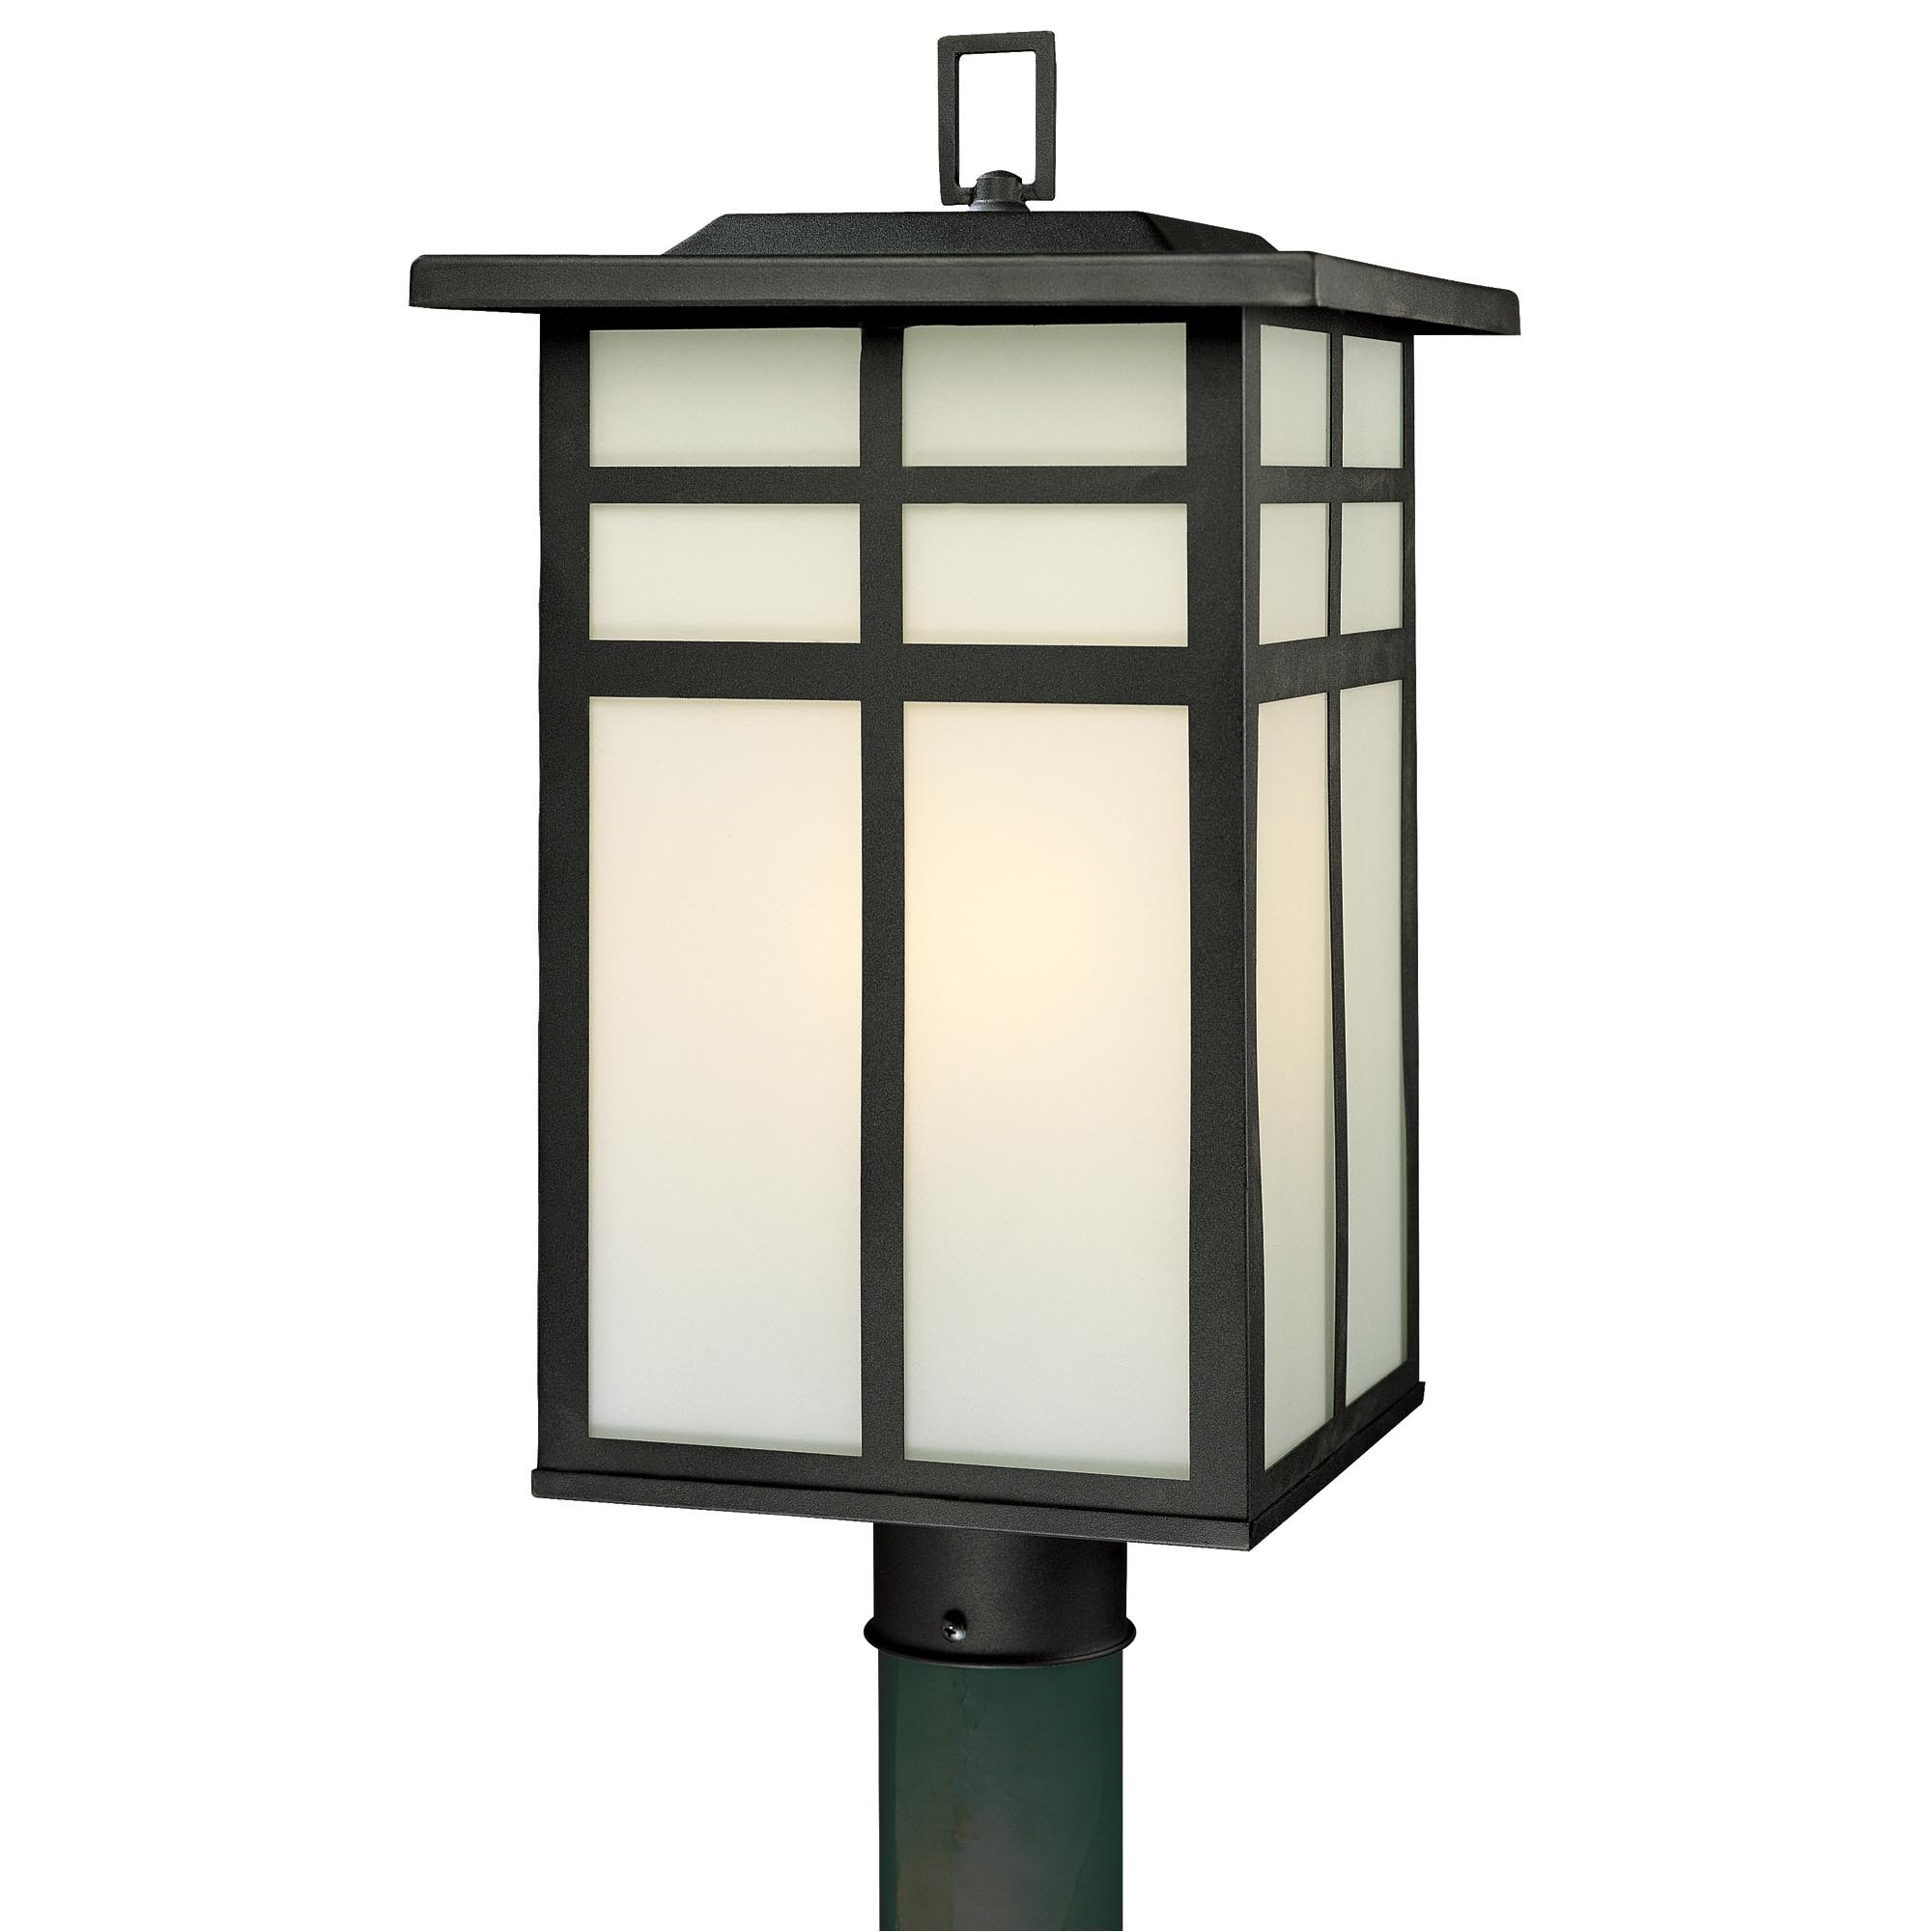 Innova Lighting Led 3 Light Outdoor Lamp Post Beauty And An Amazing